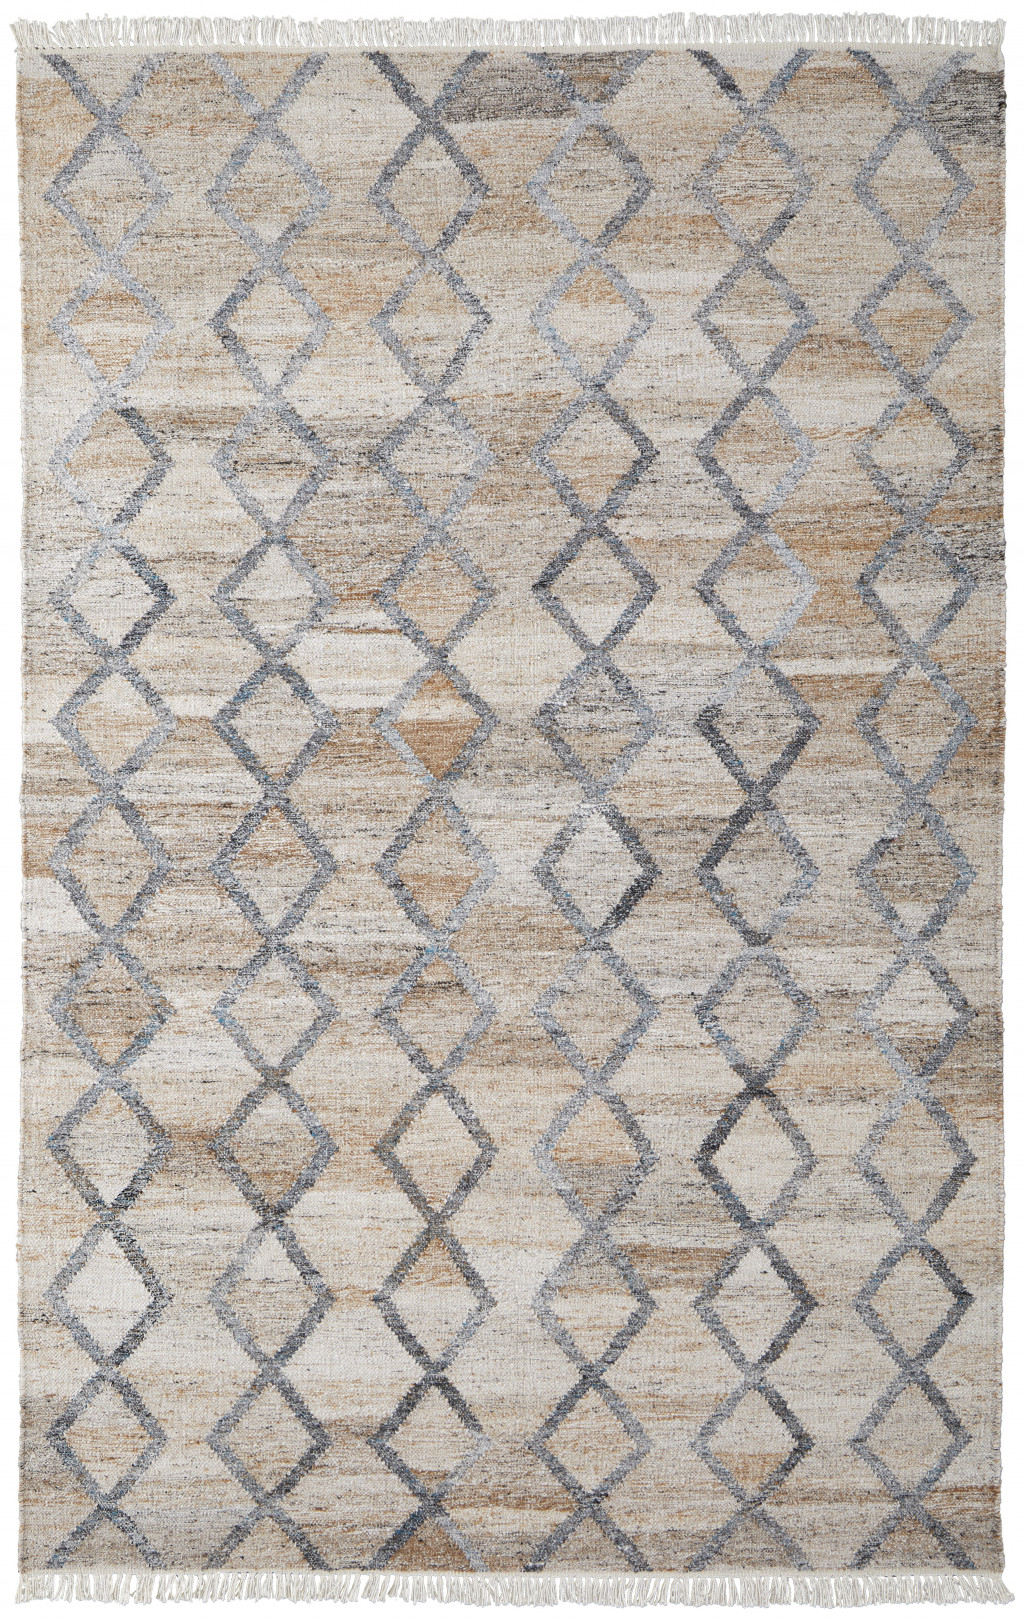 9' X 12' Gray Ivory And Tan Geometric Hand Woven Stain Resistant Area Rug With Fringe-512431-1